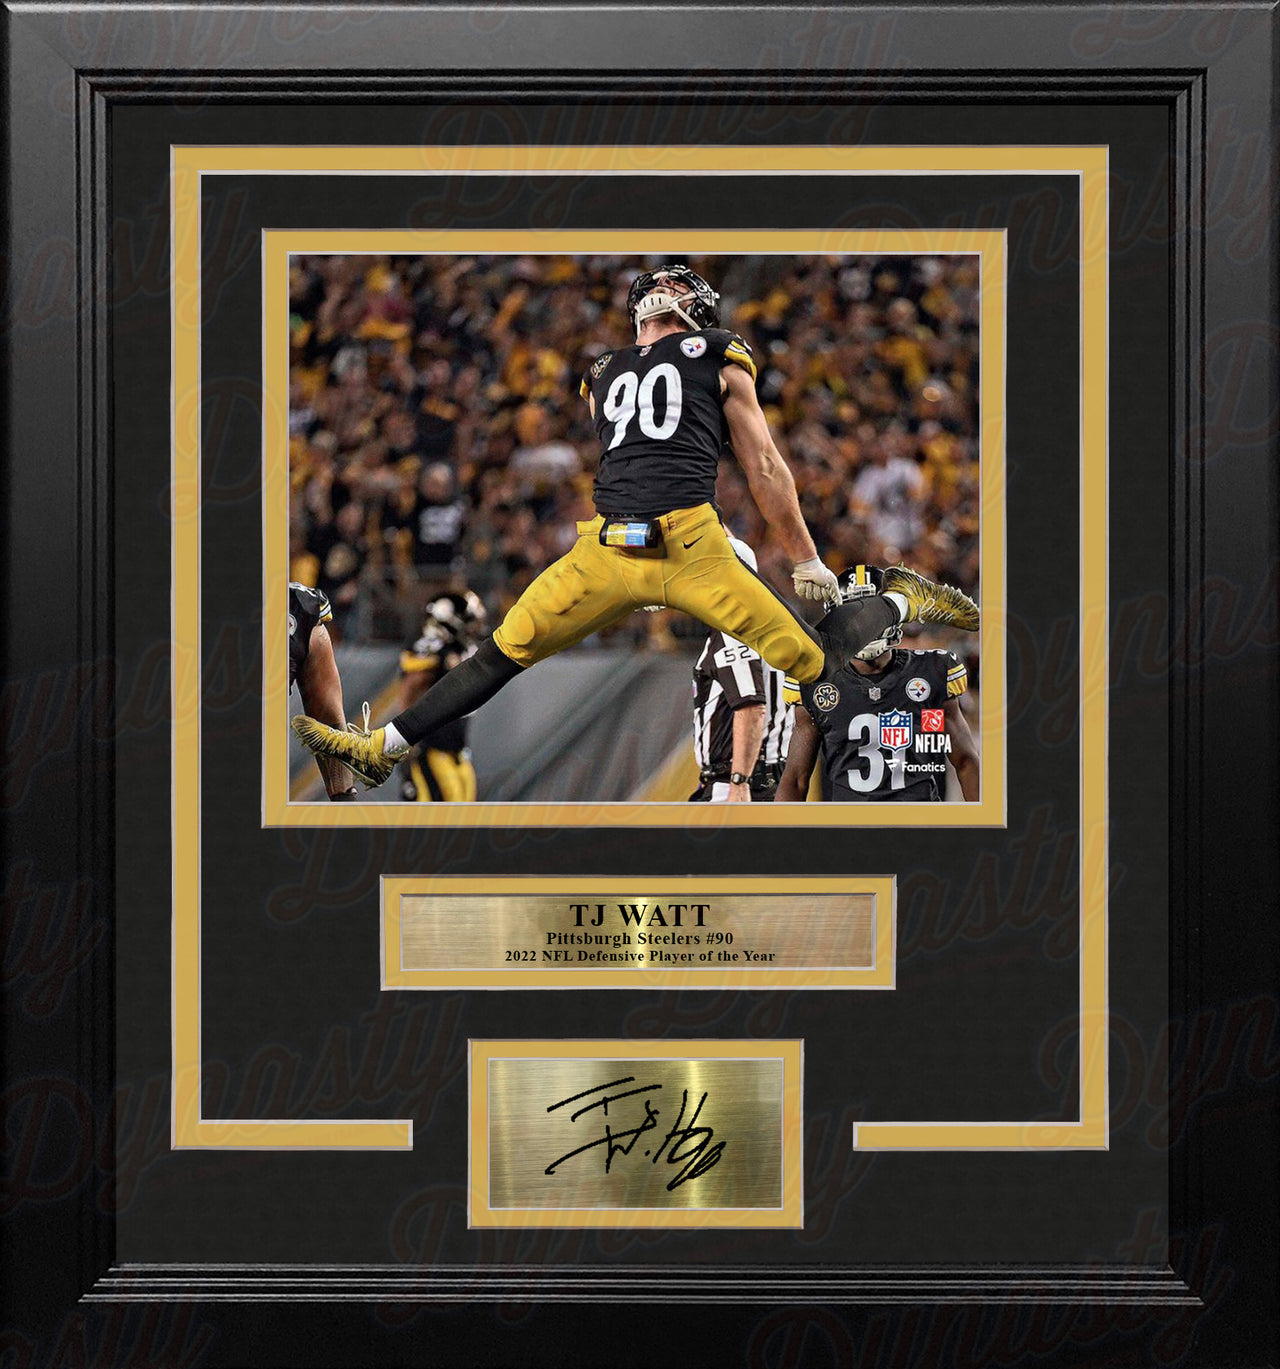 TJ Watt Celebration Pittsburgh Steelers 8" x 10" Framed Football Photo with Engraved Autograph - Dynasty Sports & Framing 